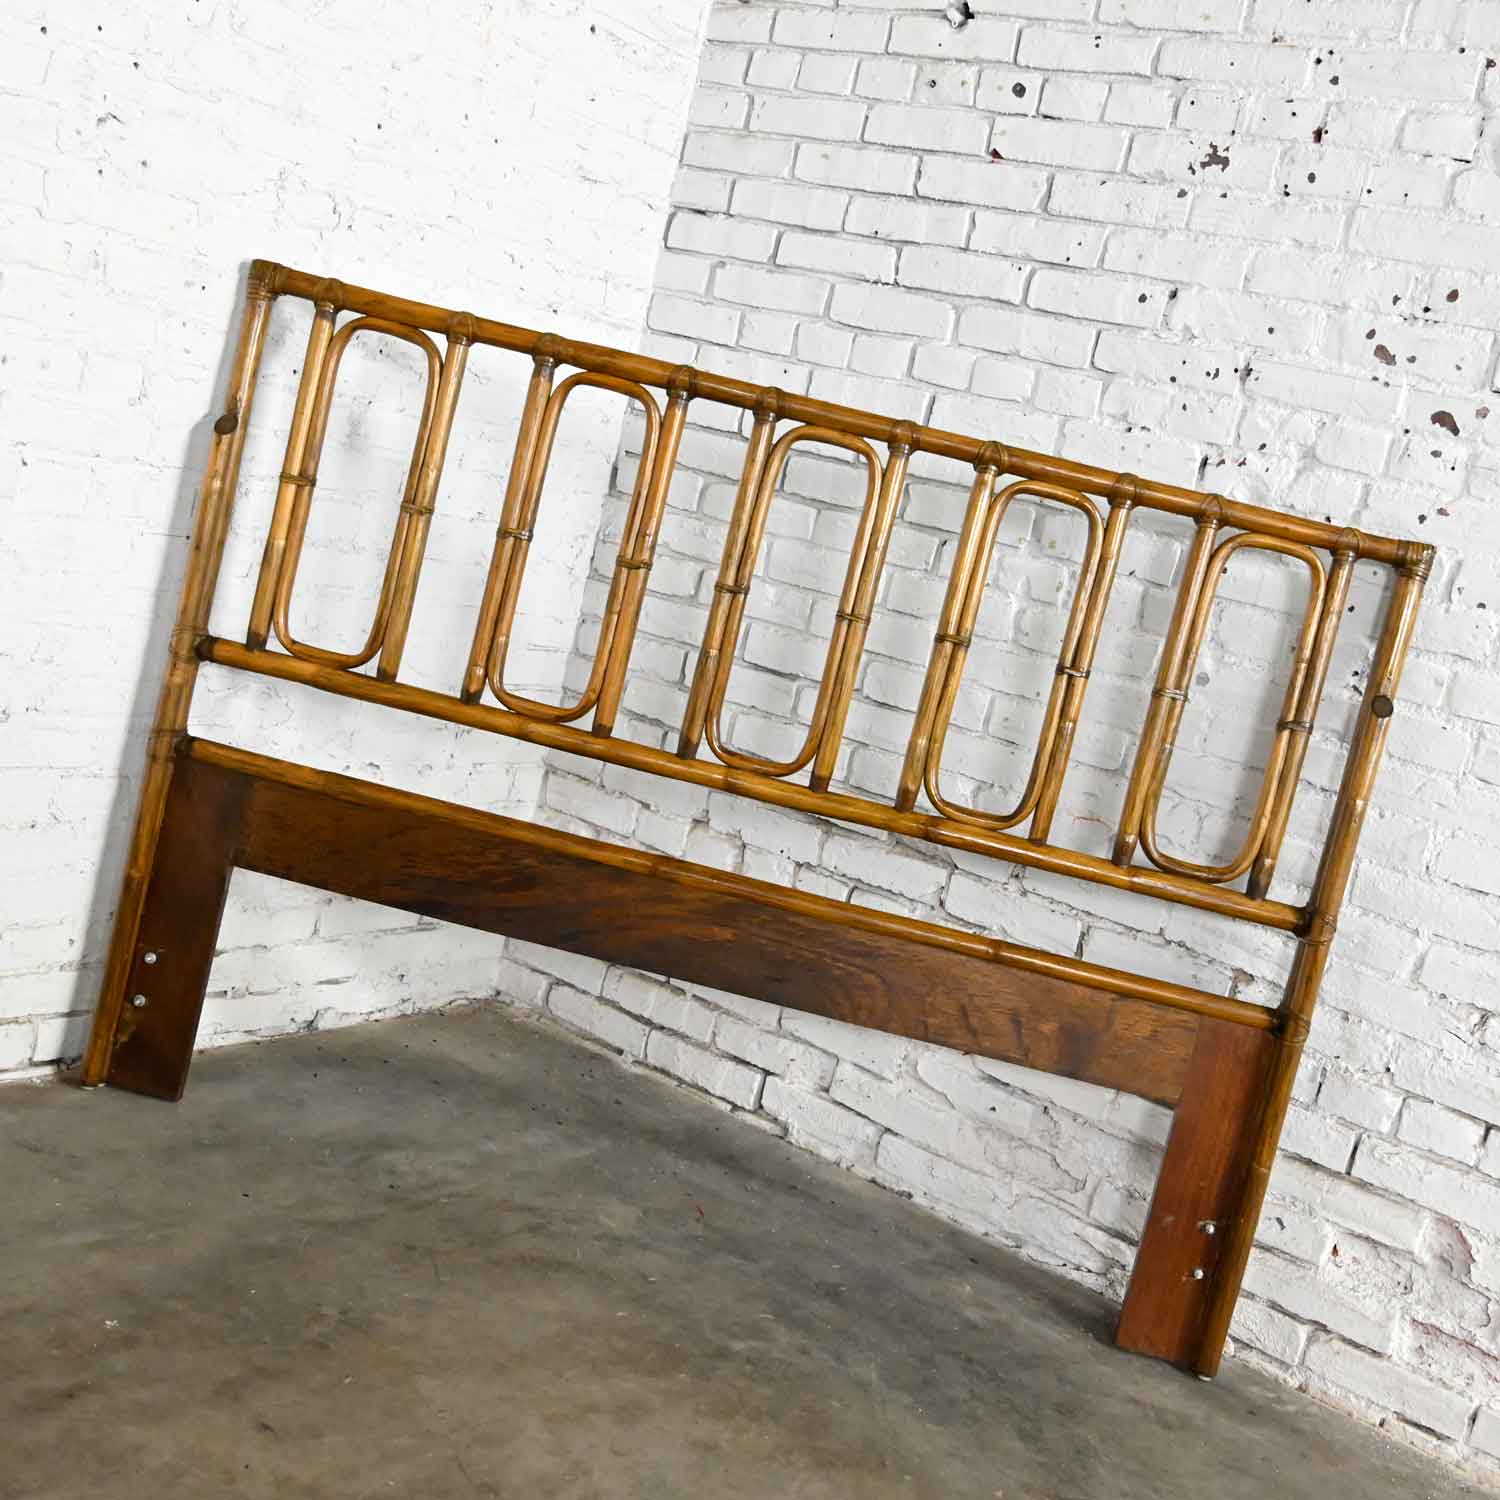 Vintage Campaign or Chinoiserie Style Rattan Queen Headboard by McGuire with Leather Wrap